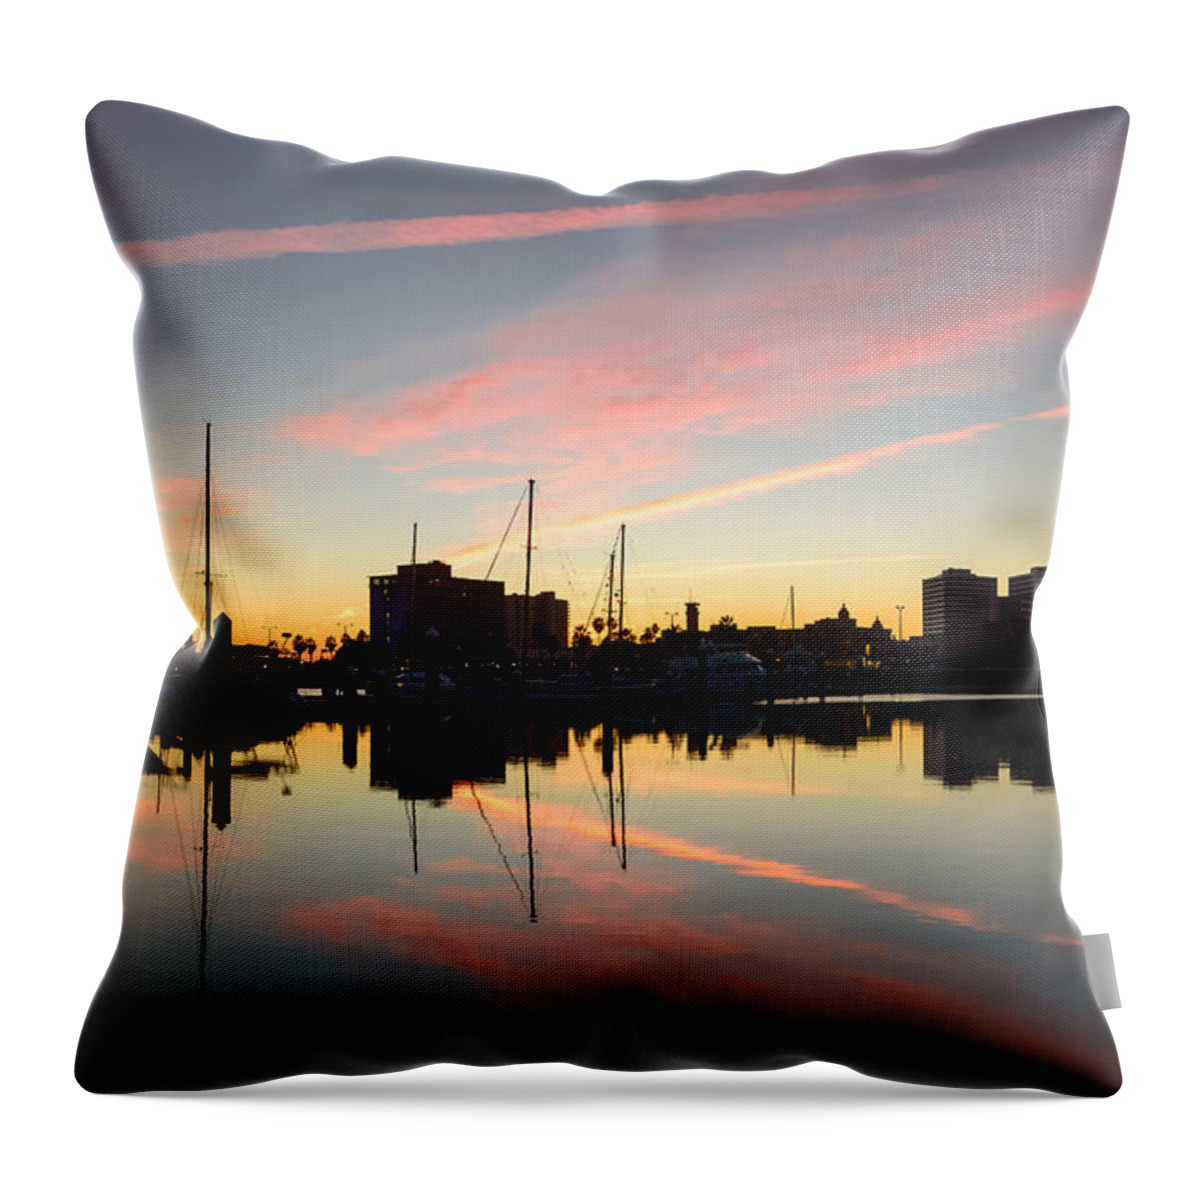 Boat Throw Pillow featuring the photograph Marina Sunset 3 by Leticia Latocki